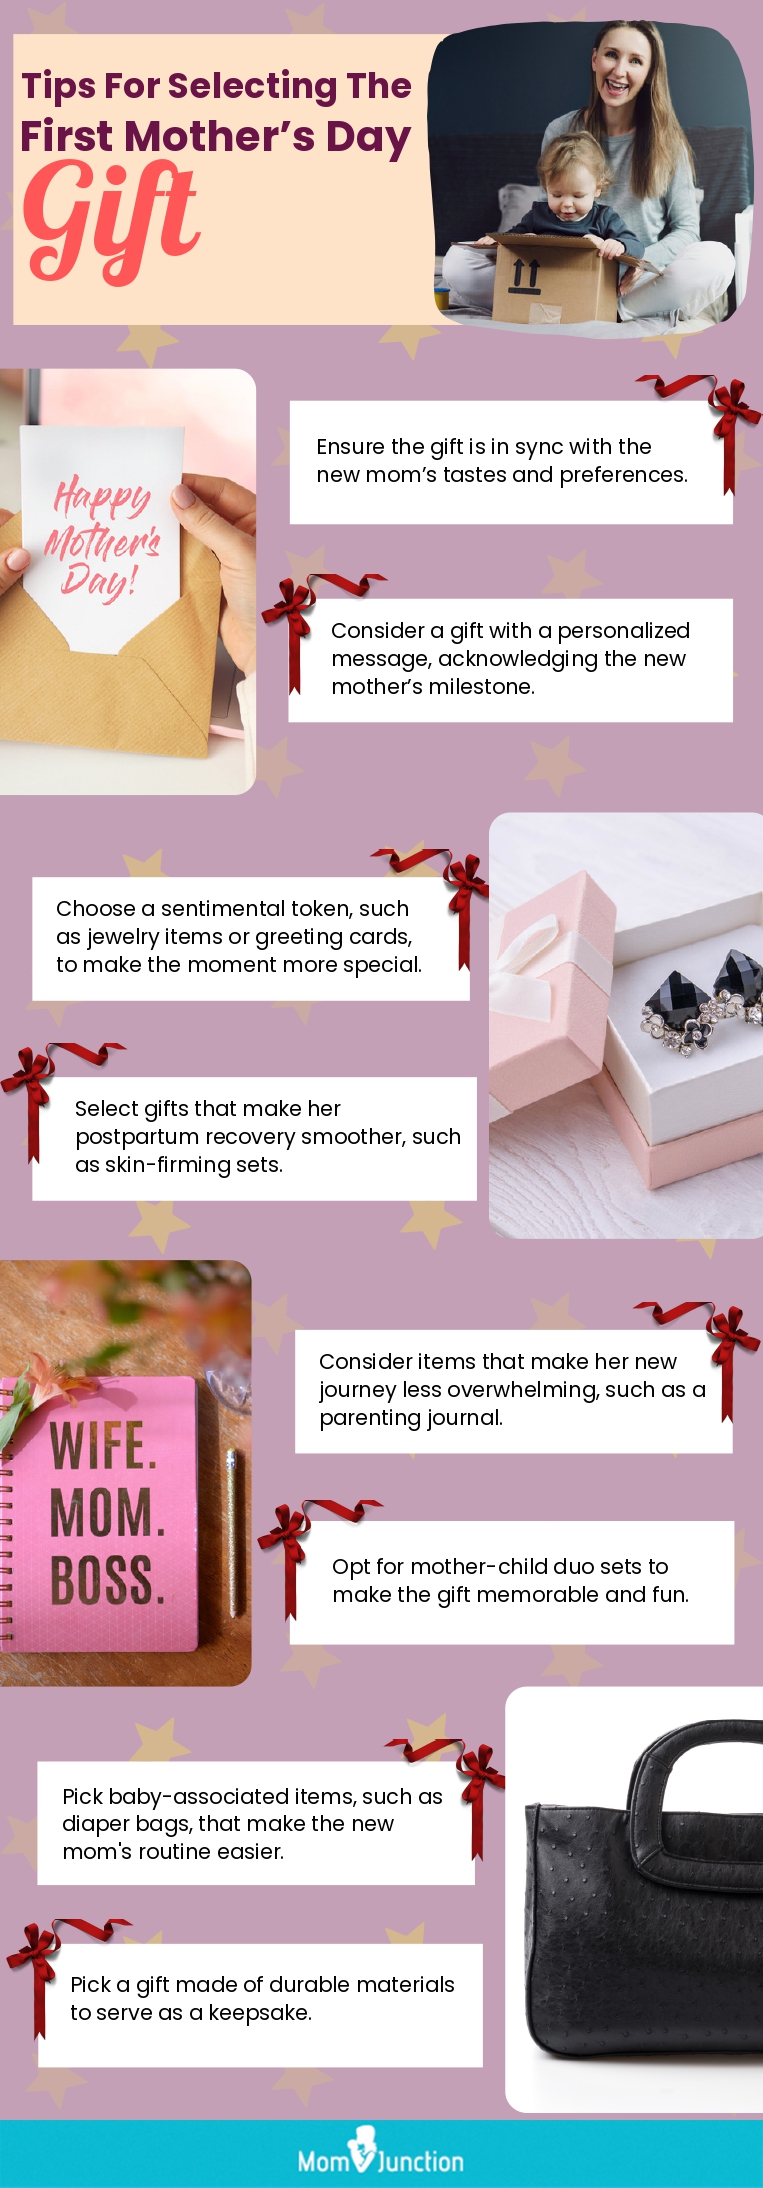 Points To Consider When Selecting The Right First Mother’s Day Gift (infographic)